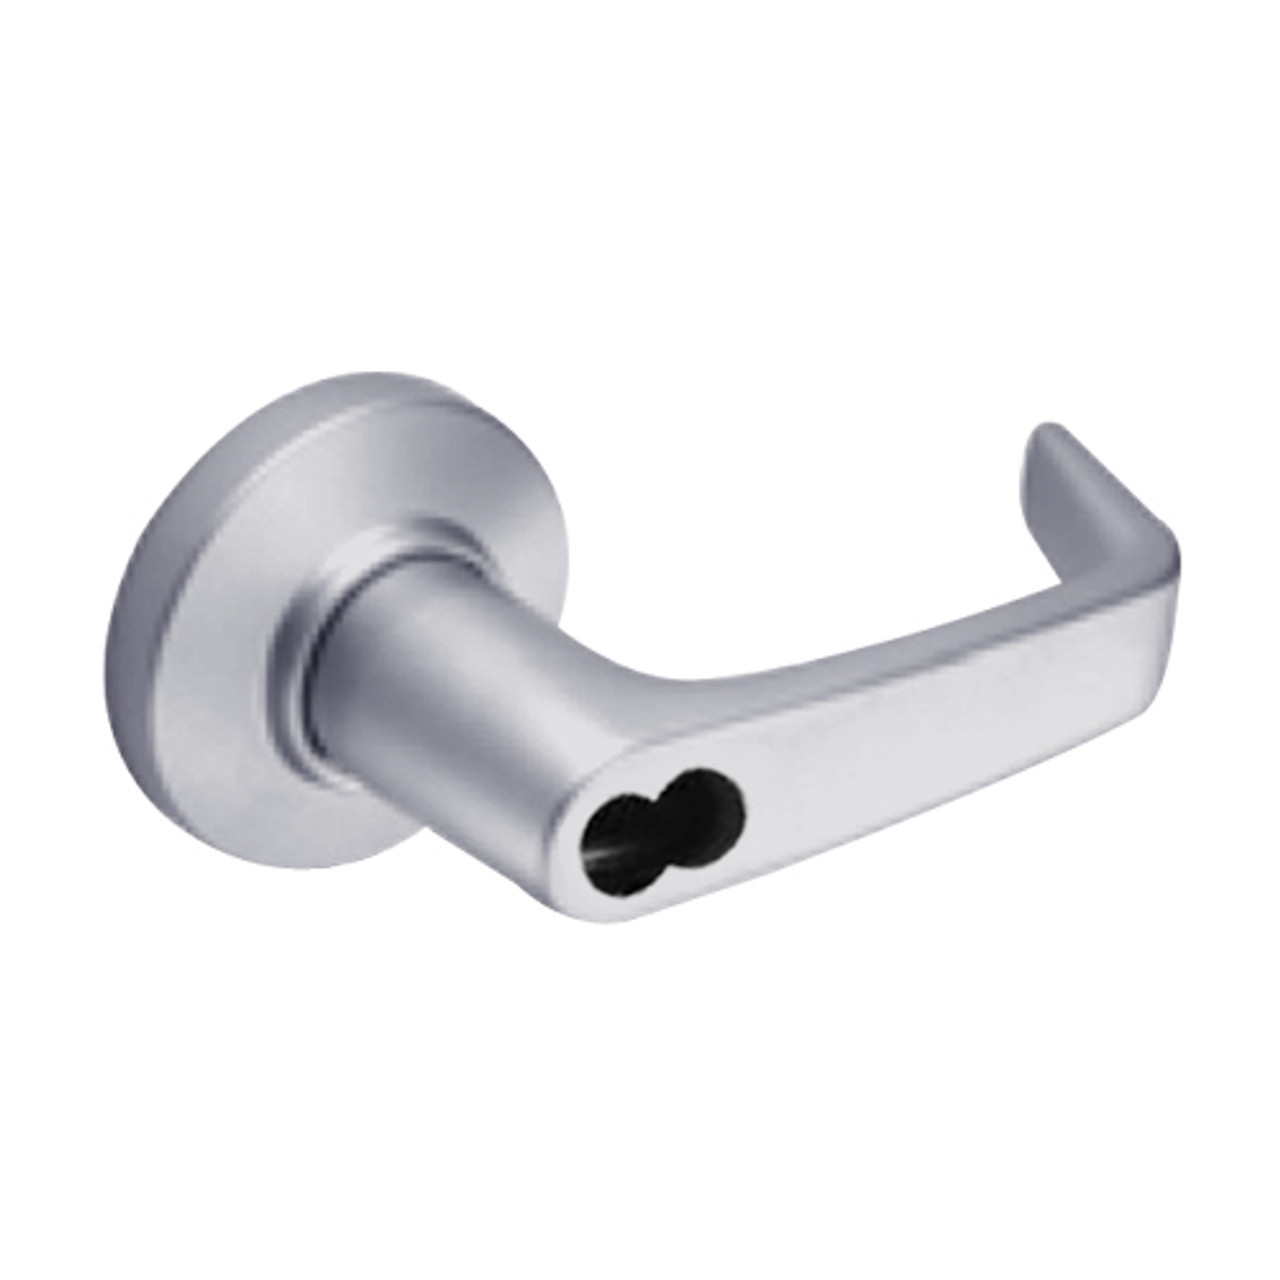 9K37A15CS3626LM Best 9K Series Dormitory or Storeroom Cylindrical Lever Locks with Contour Angle with Return Lever Design Accept 7 Pin Best Core in Satin Chrome